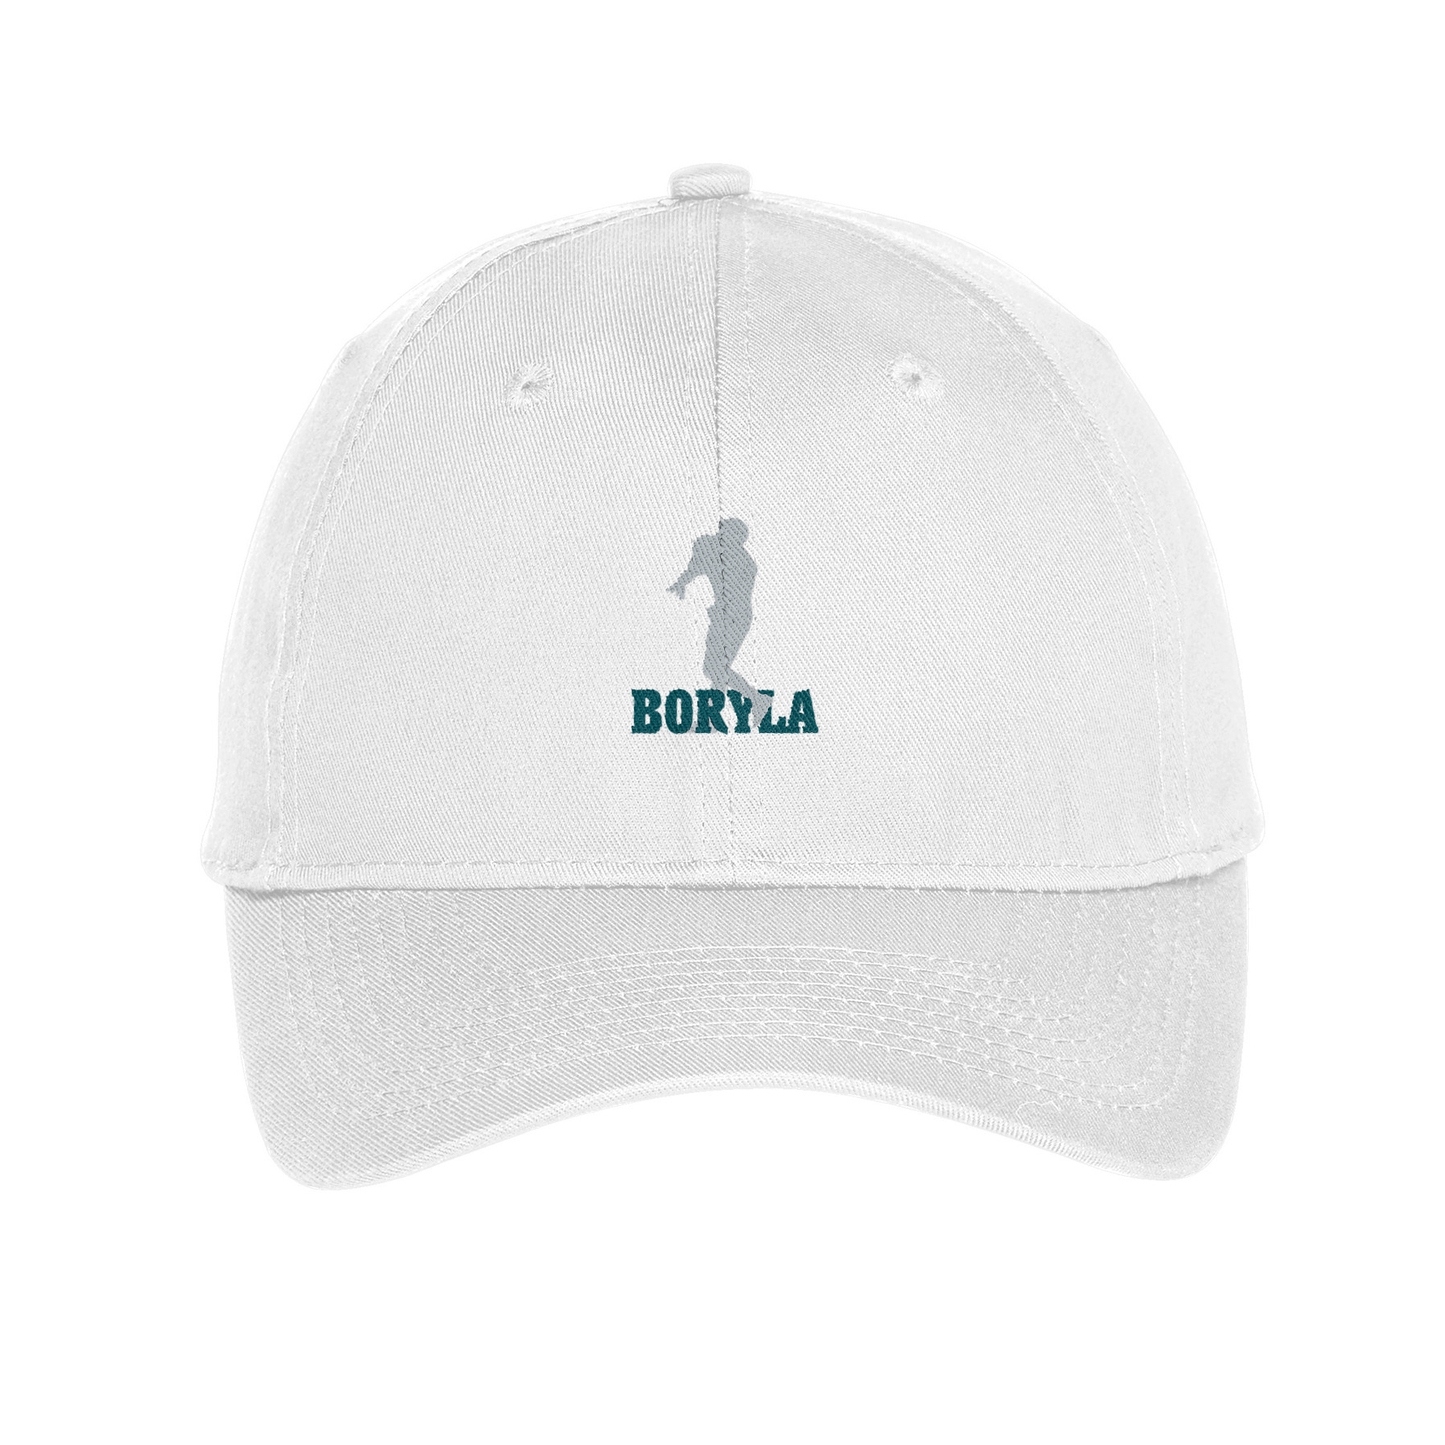 GT Boryla Embroidered Twill Cap